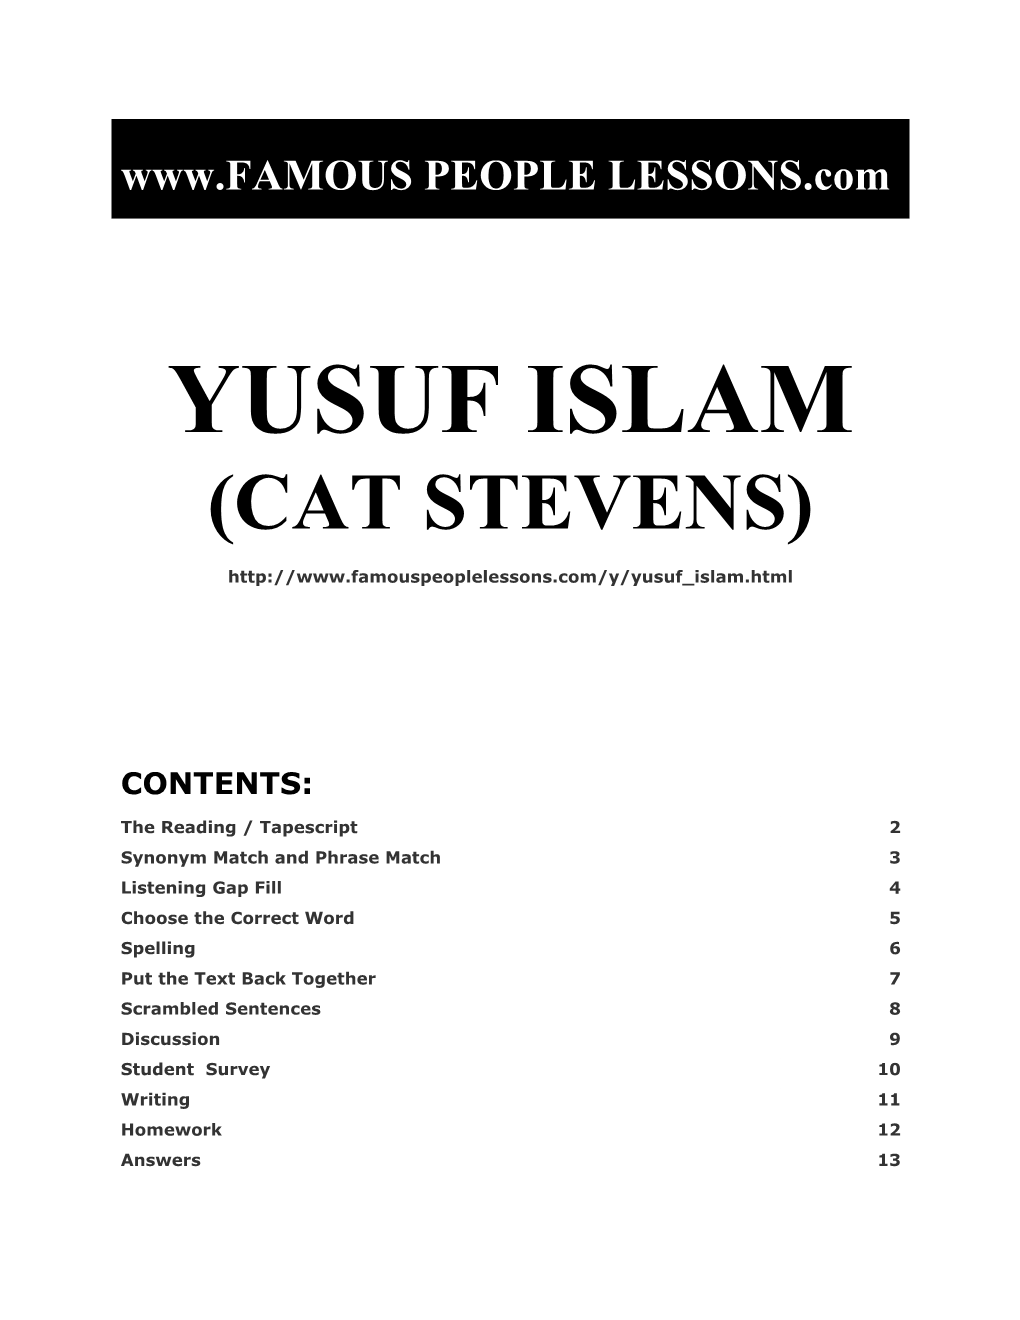 Famous People Lessons - Yusuf Islam